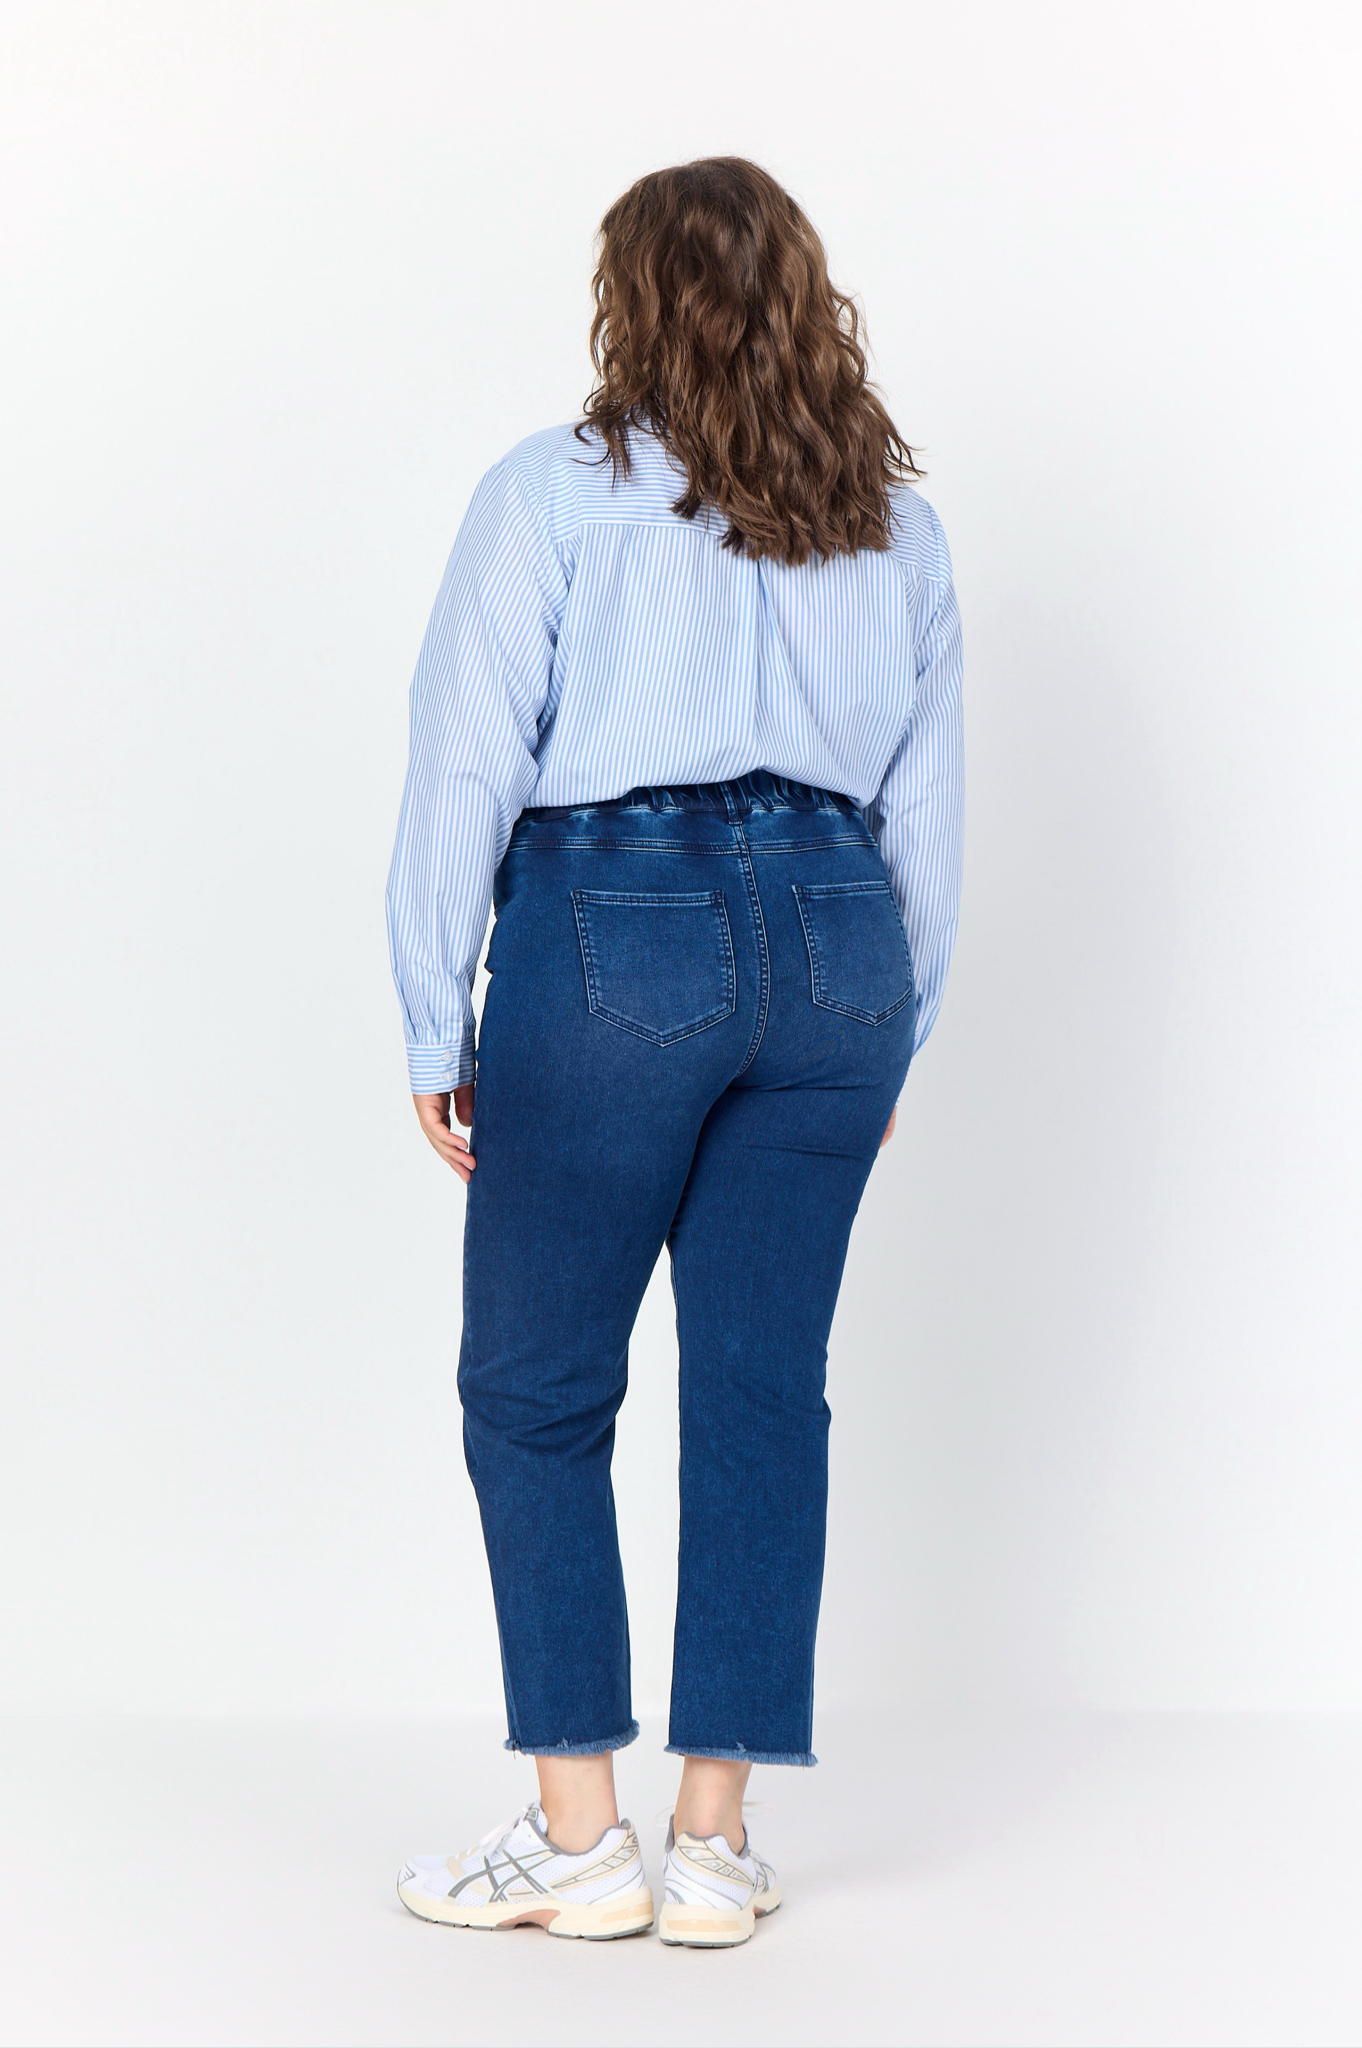 Cille - jeans